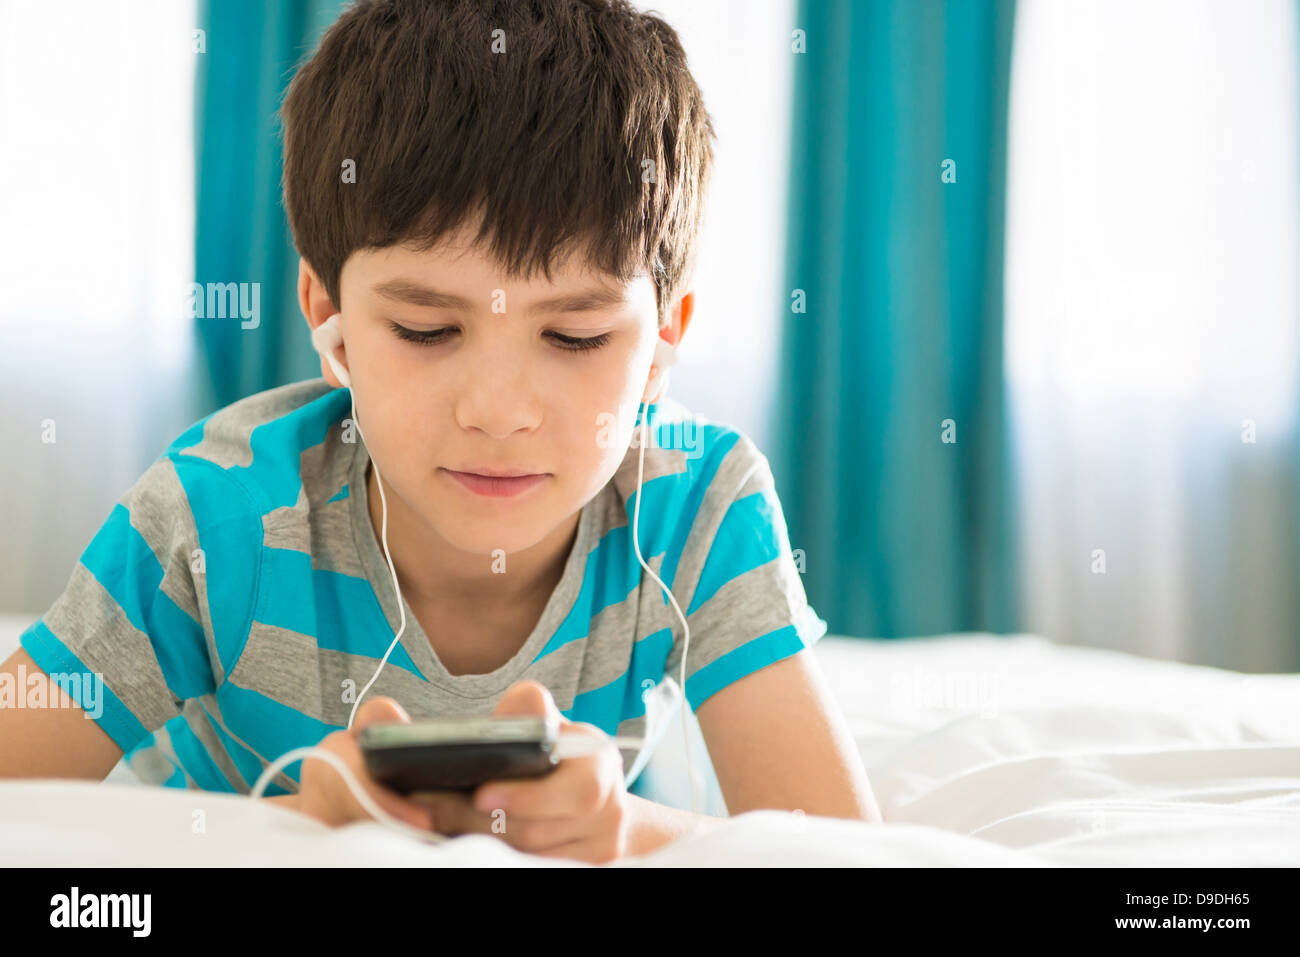 Boy listening to mp3 player on bed Stock Photo